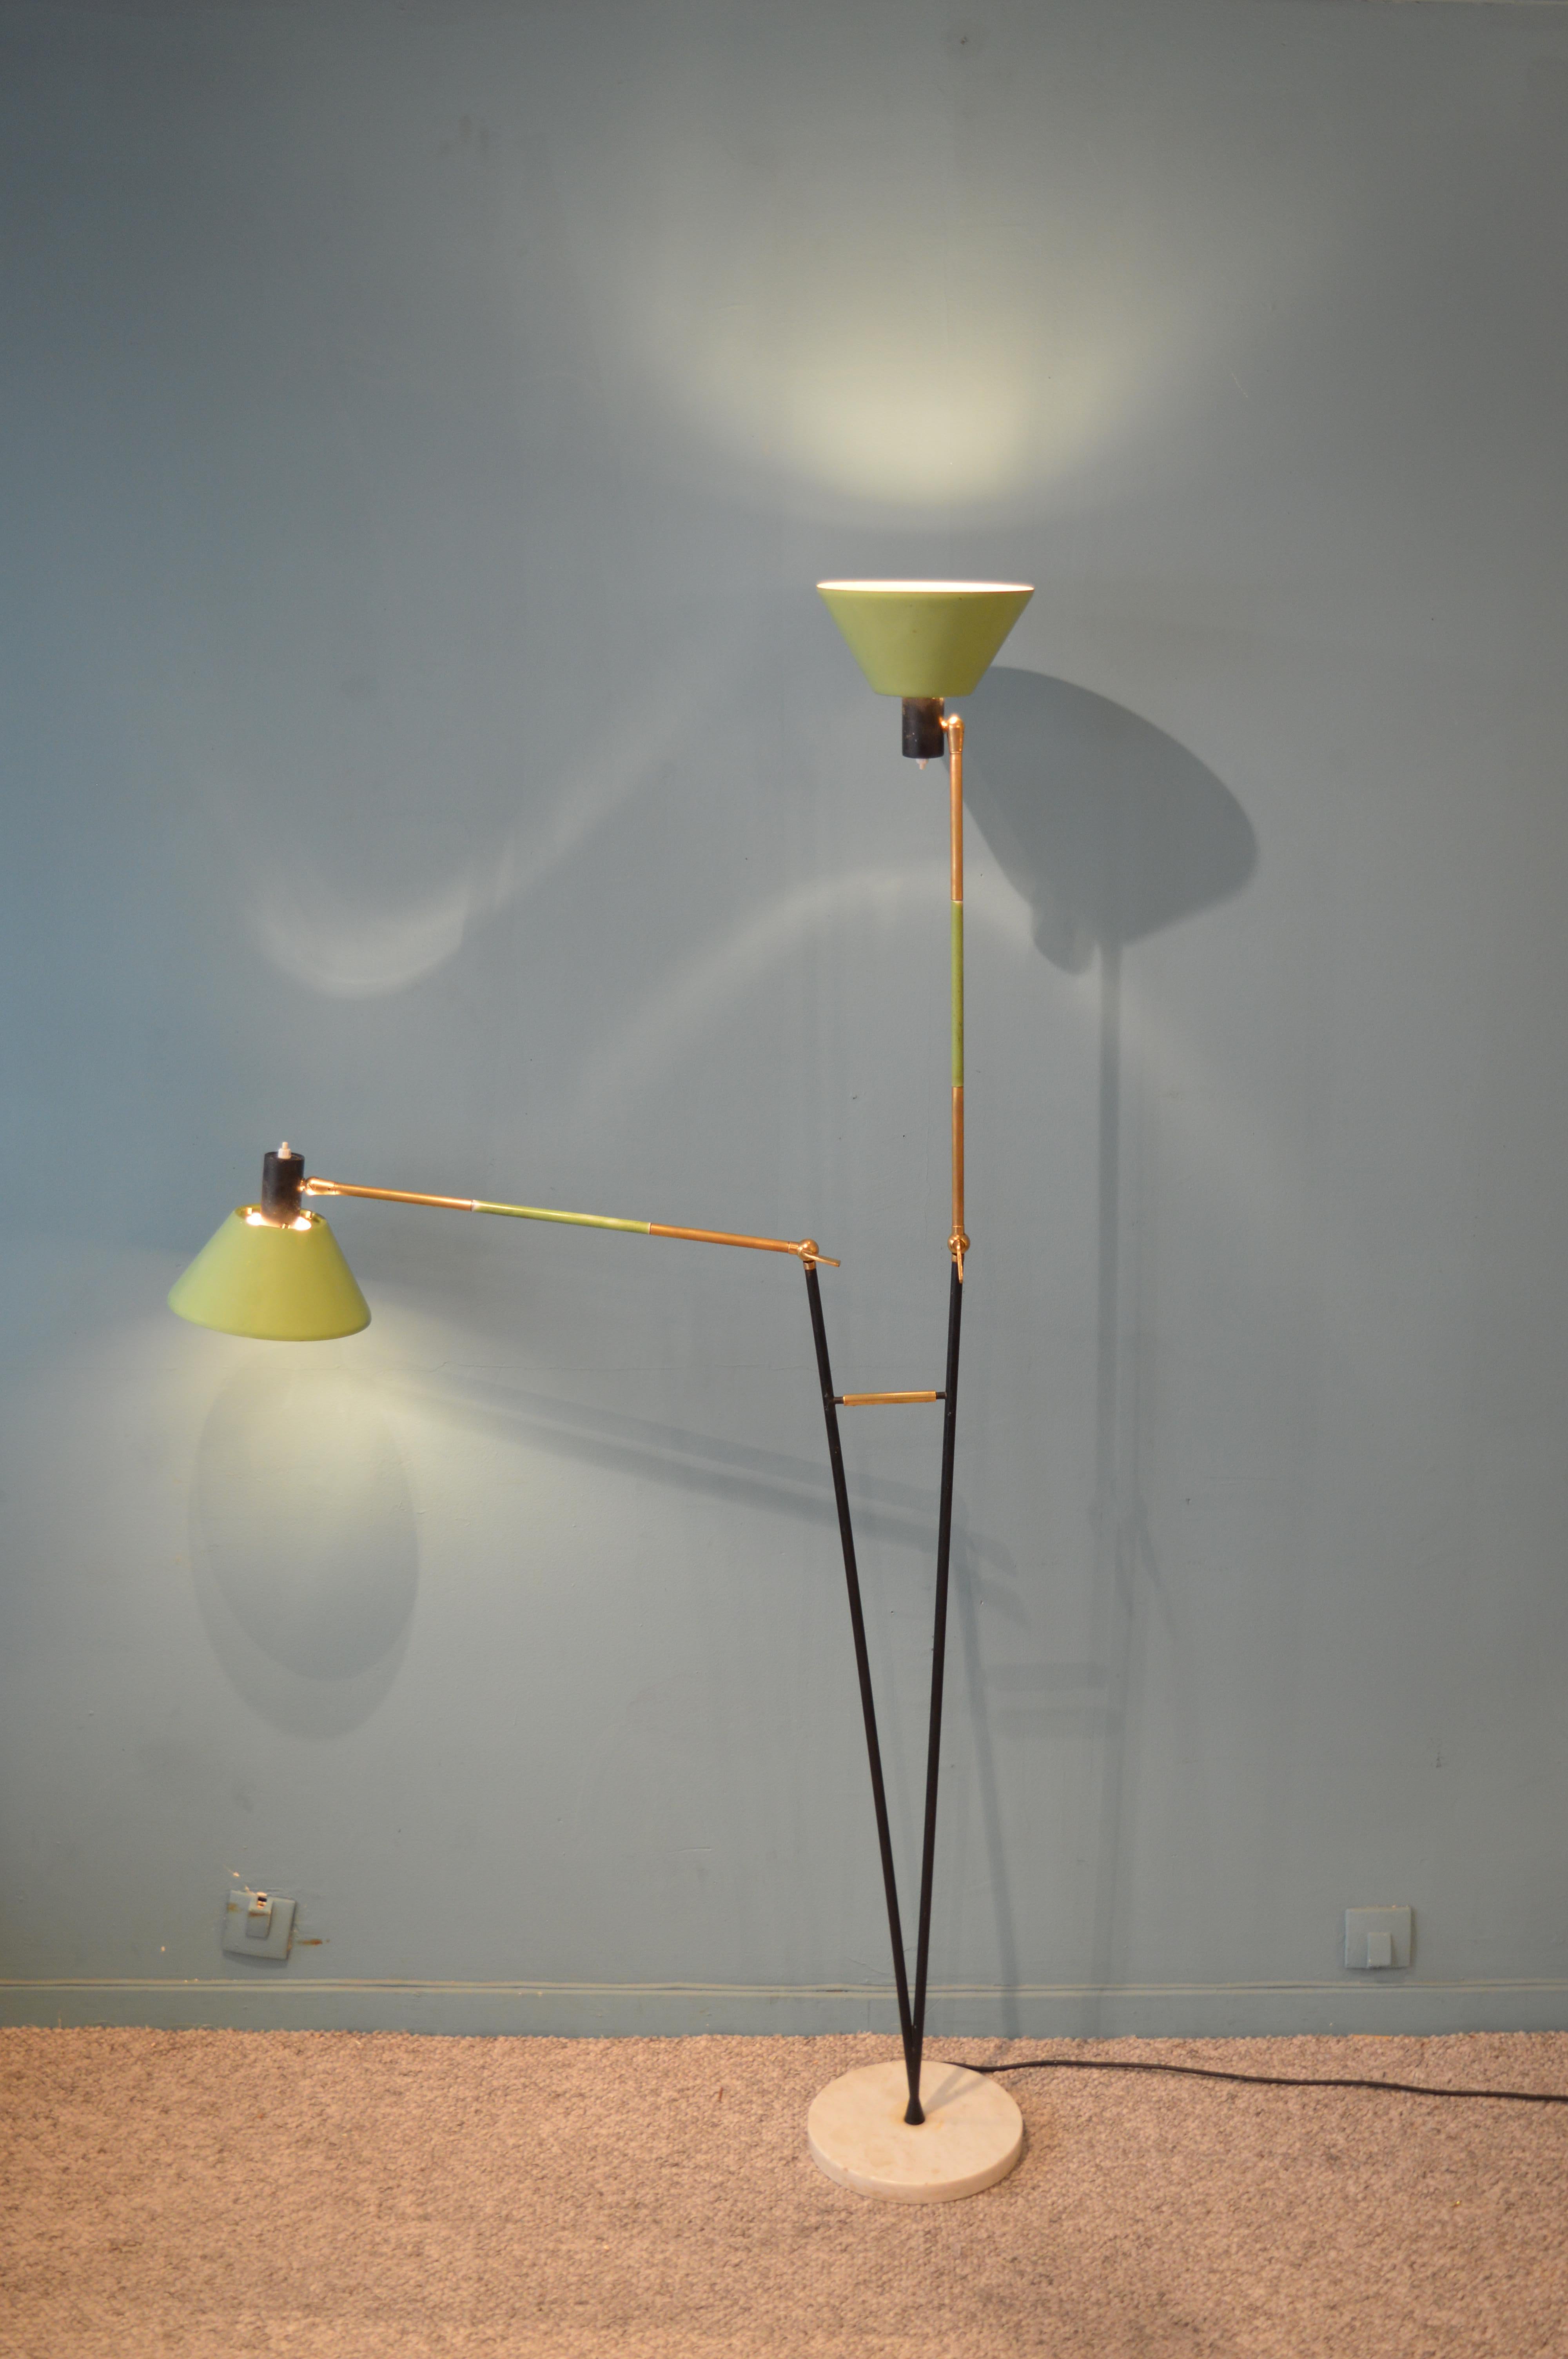 Rare and decorative floor lamp by Stilux Milano
Marble brass and lacquered metal
Signed inside Stilux Milano
Italian work circa 1960.